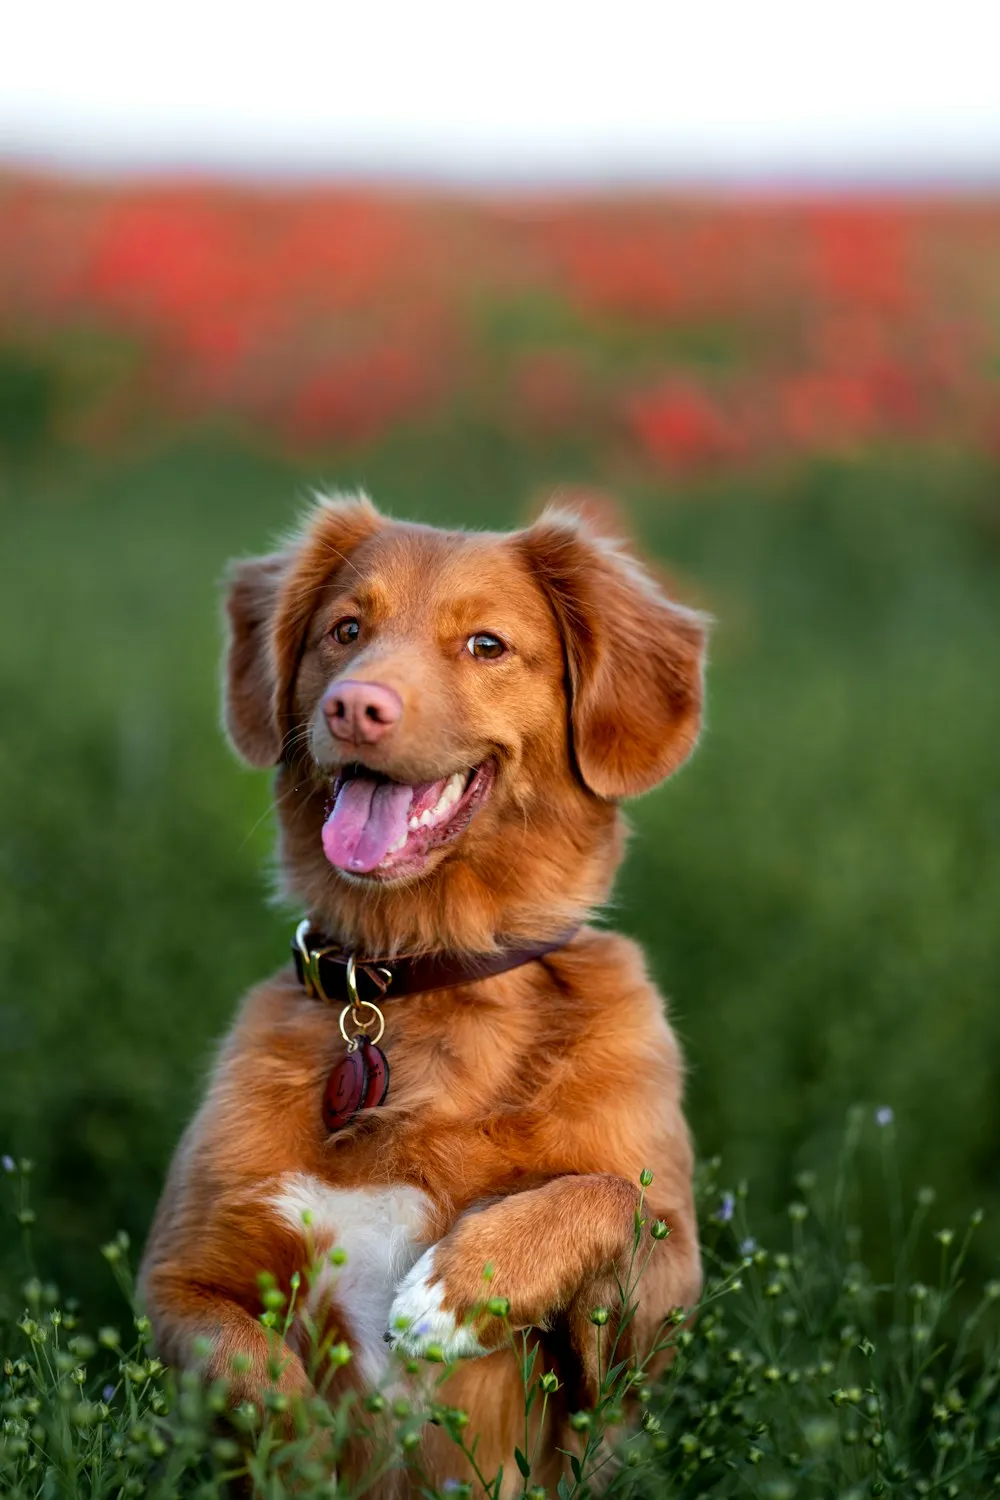 Secrets to Keeping Your Dog Healthy and Happy